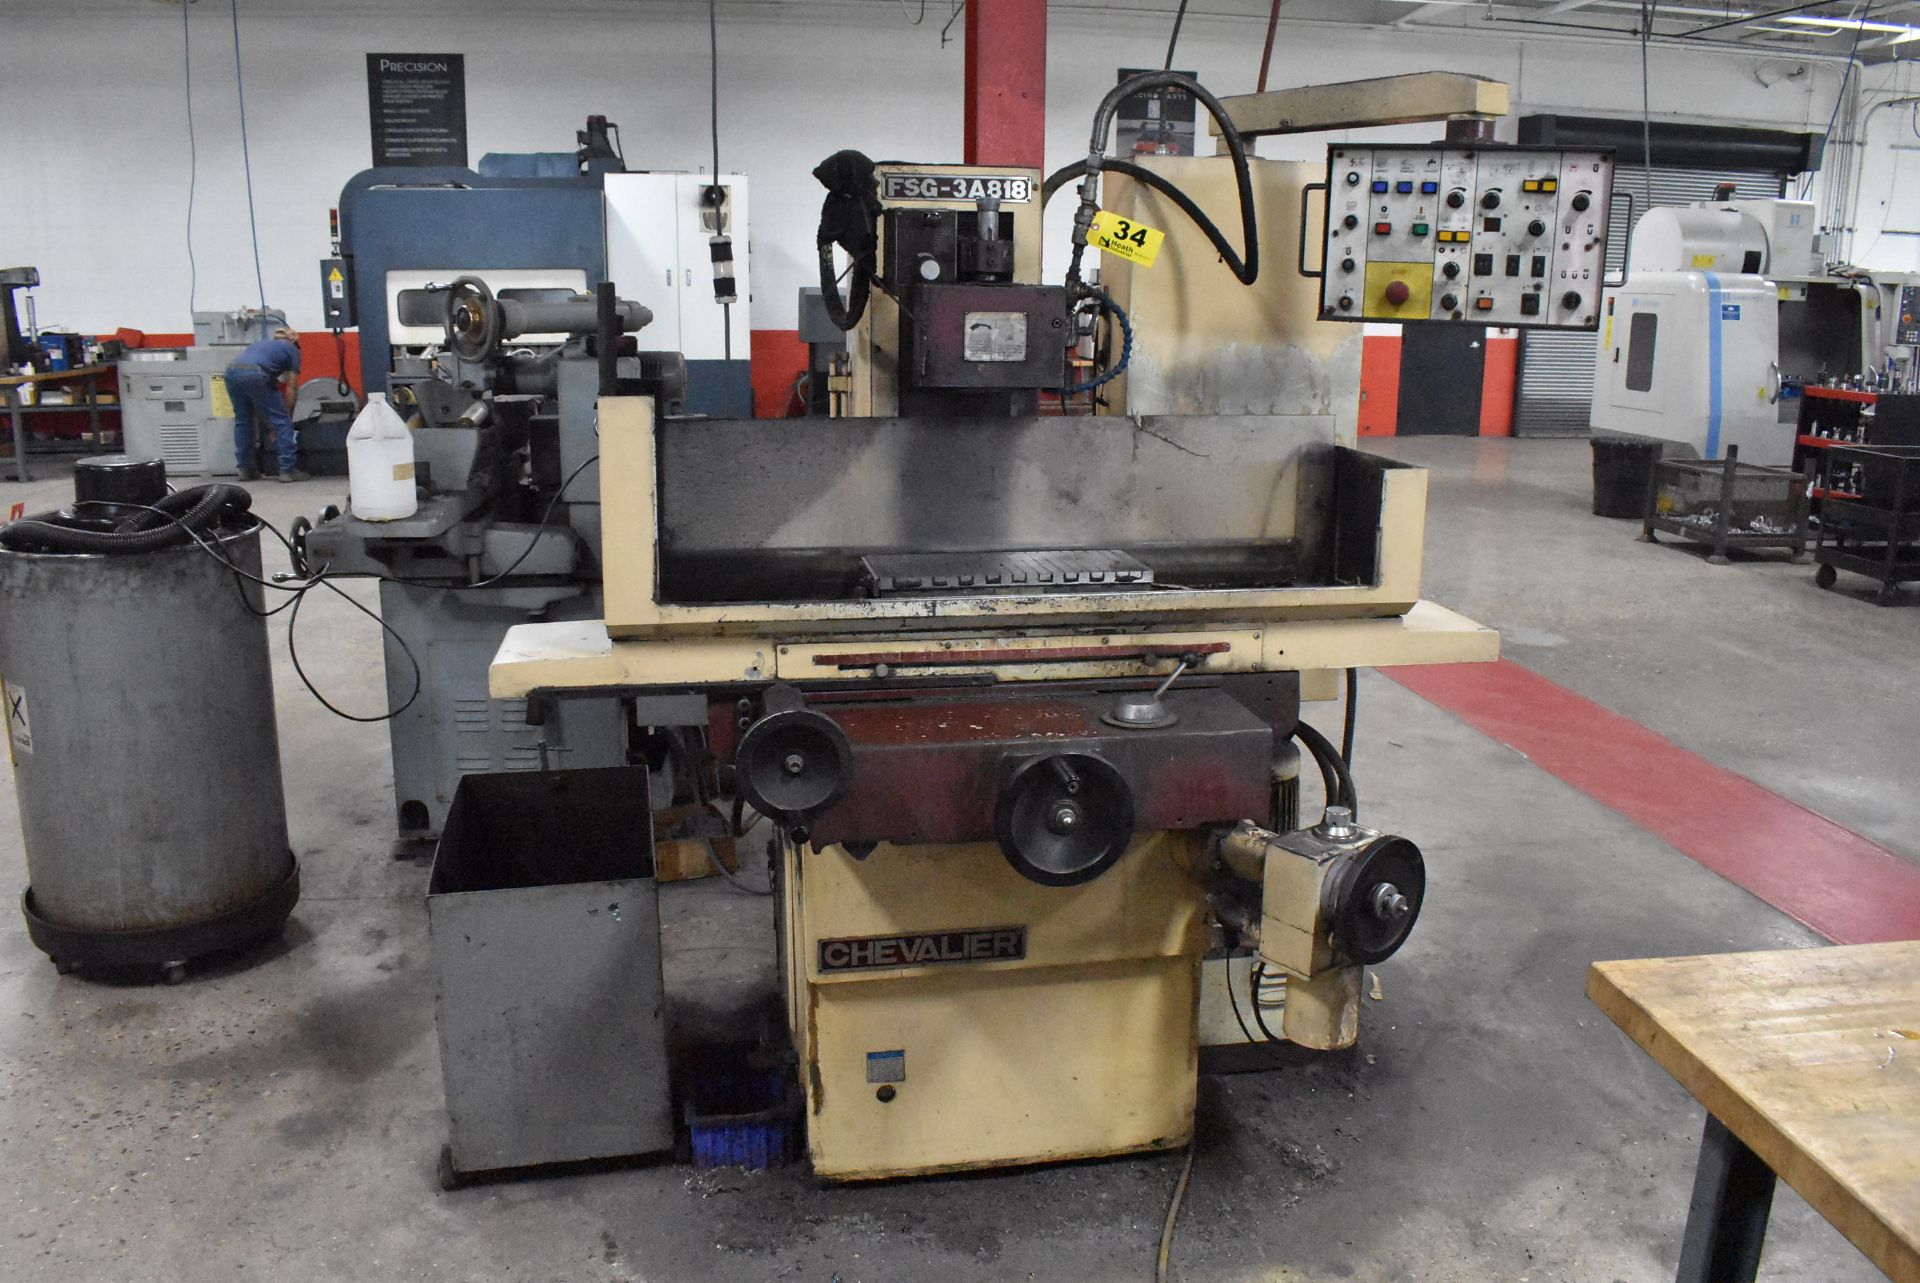 CHEVALIERÂ 8" x 18" MODEL FSG-3A818 HYDRAULIC SURFACE GRINDER, S/N M3841007, WITH ELECTRO MAGNETIC